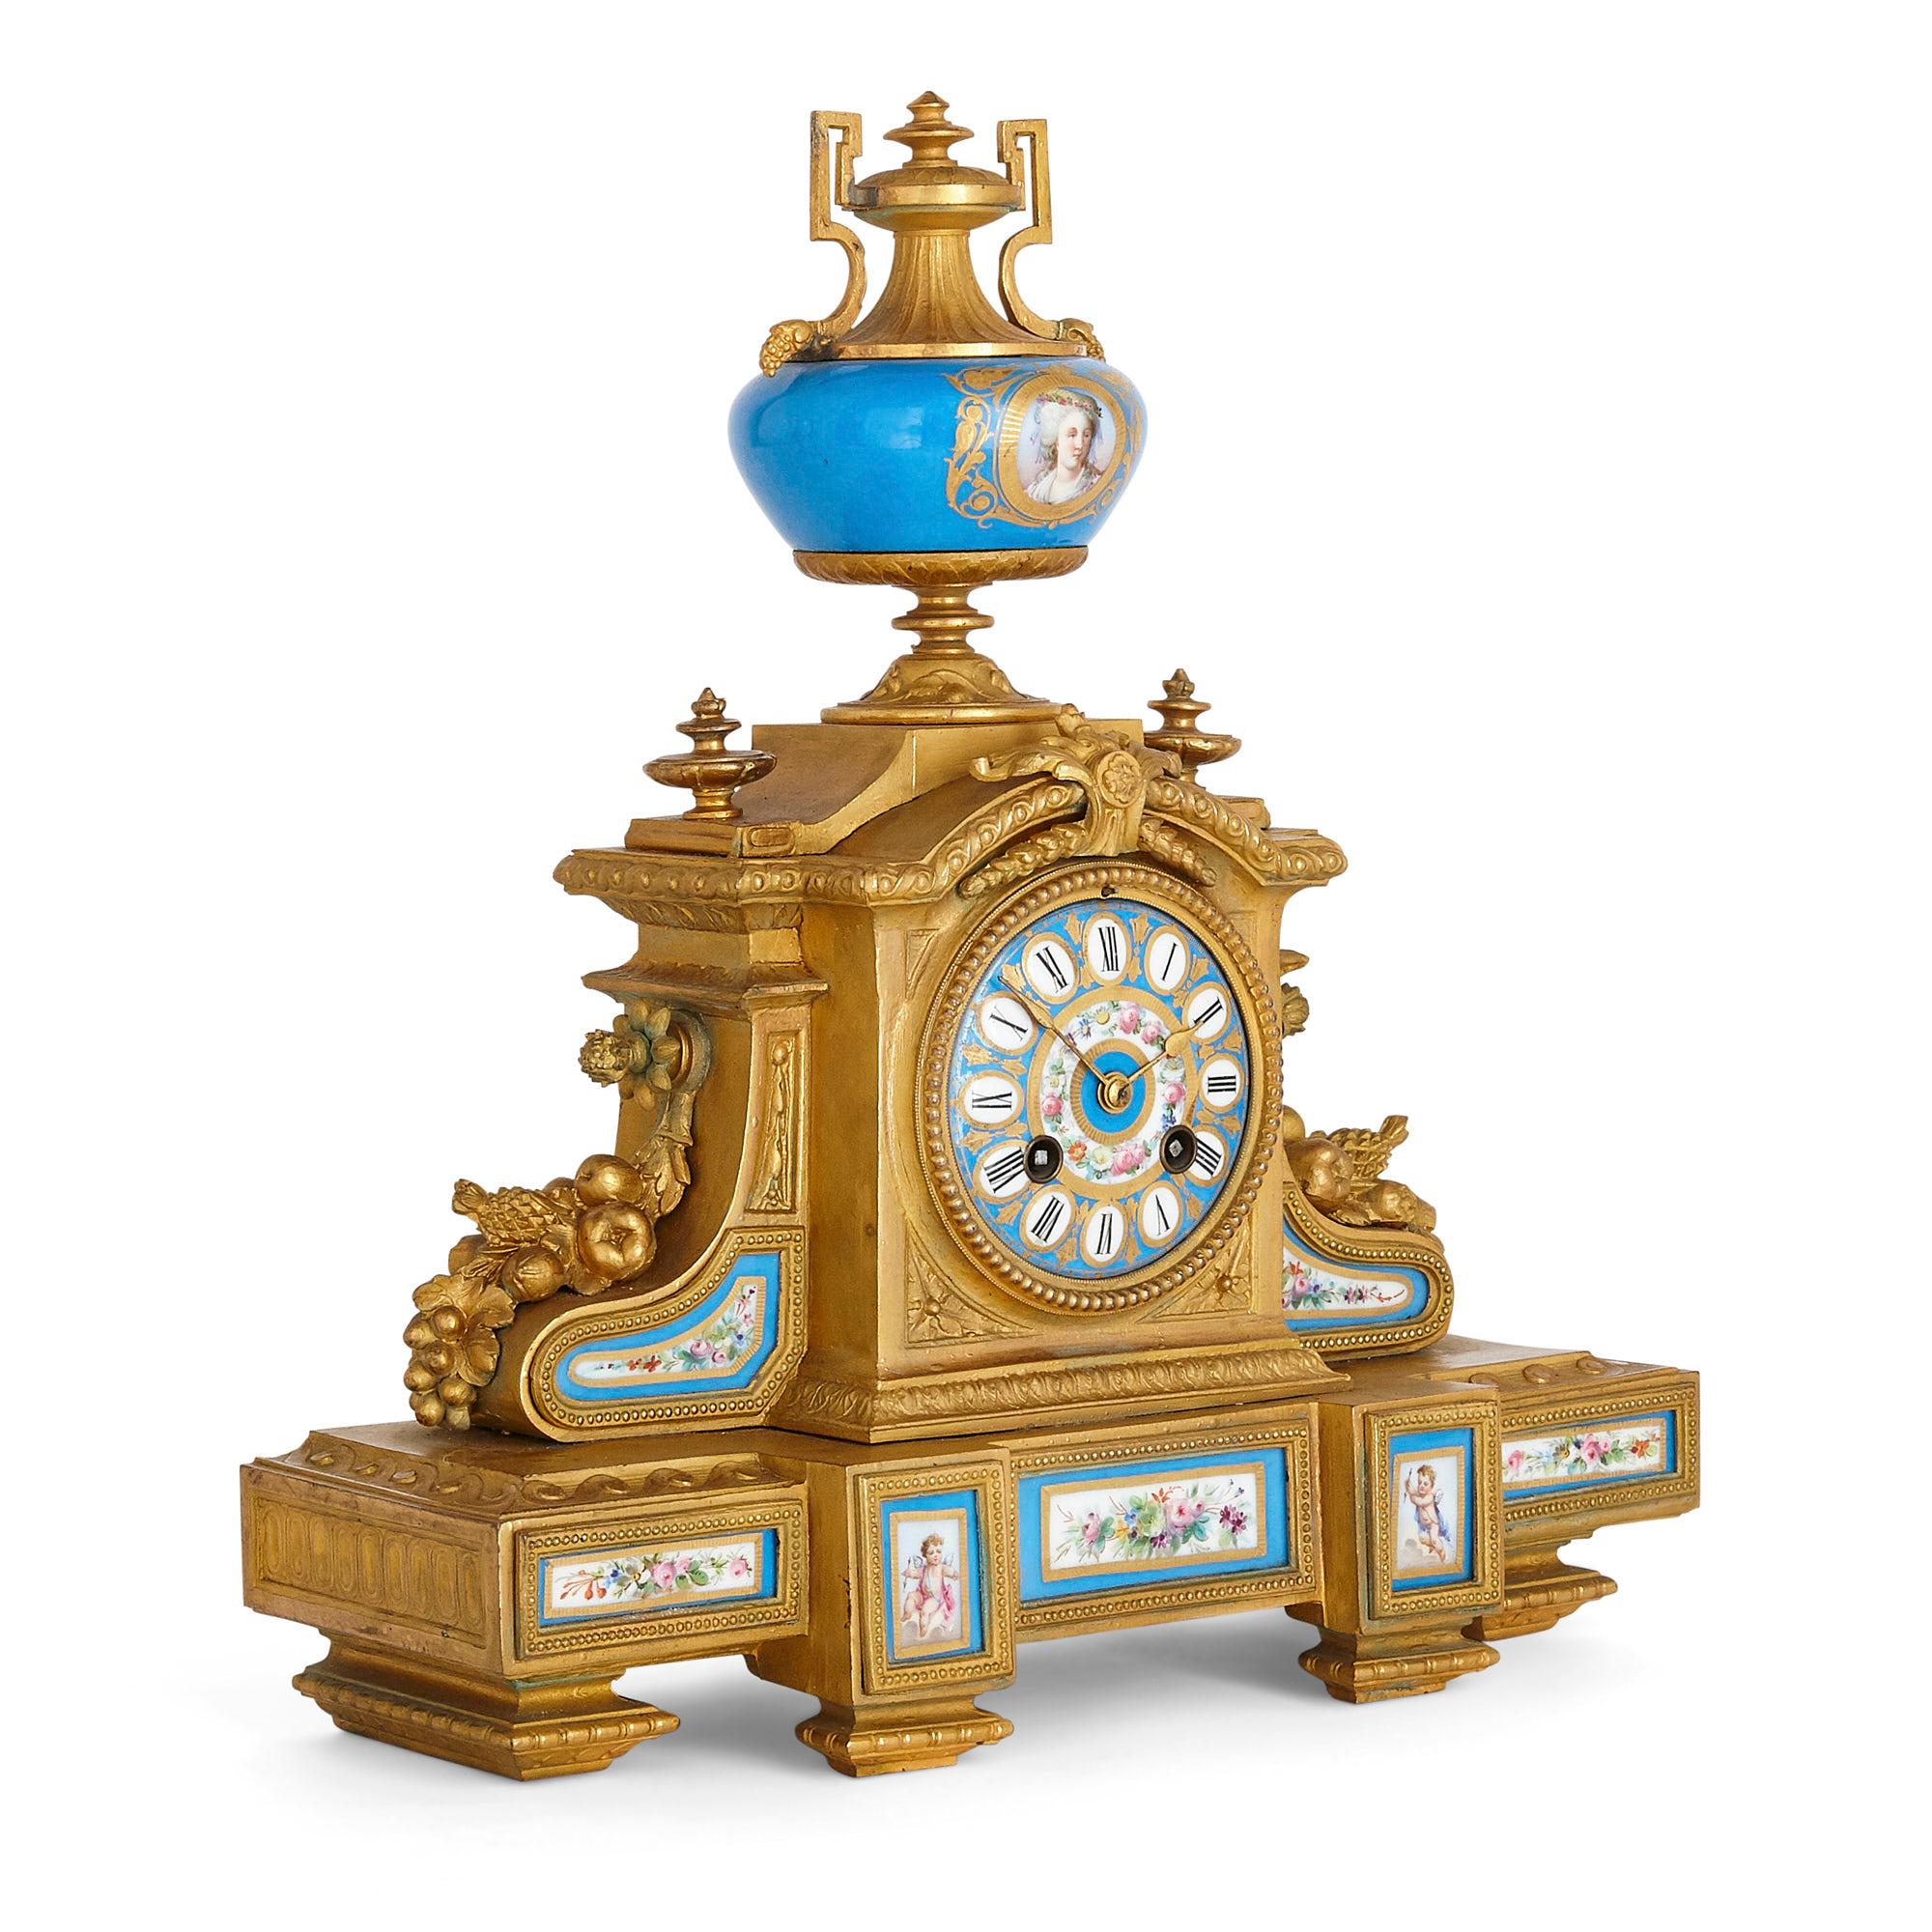 Antique Three-piece Louis XV and Sèvres style clock and ewer set
French, late 19th century
Dimensions: Height 36cm, width 34cm, depth 12cm

Consisting of a central mantel clock and pair of ewers, this beautifully ornate ormolu clock set is